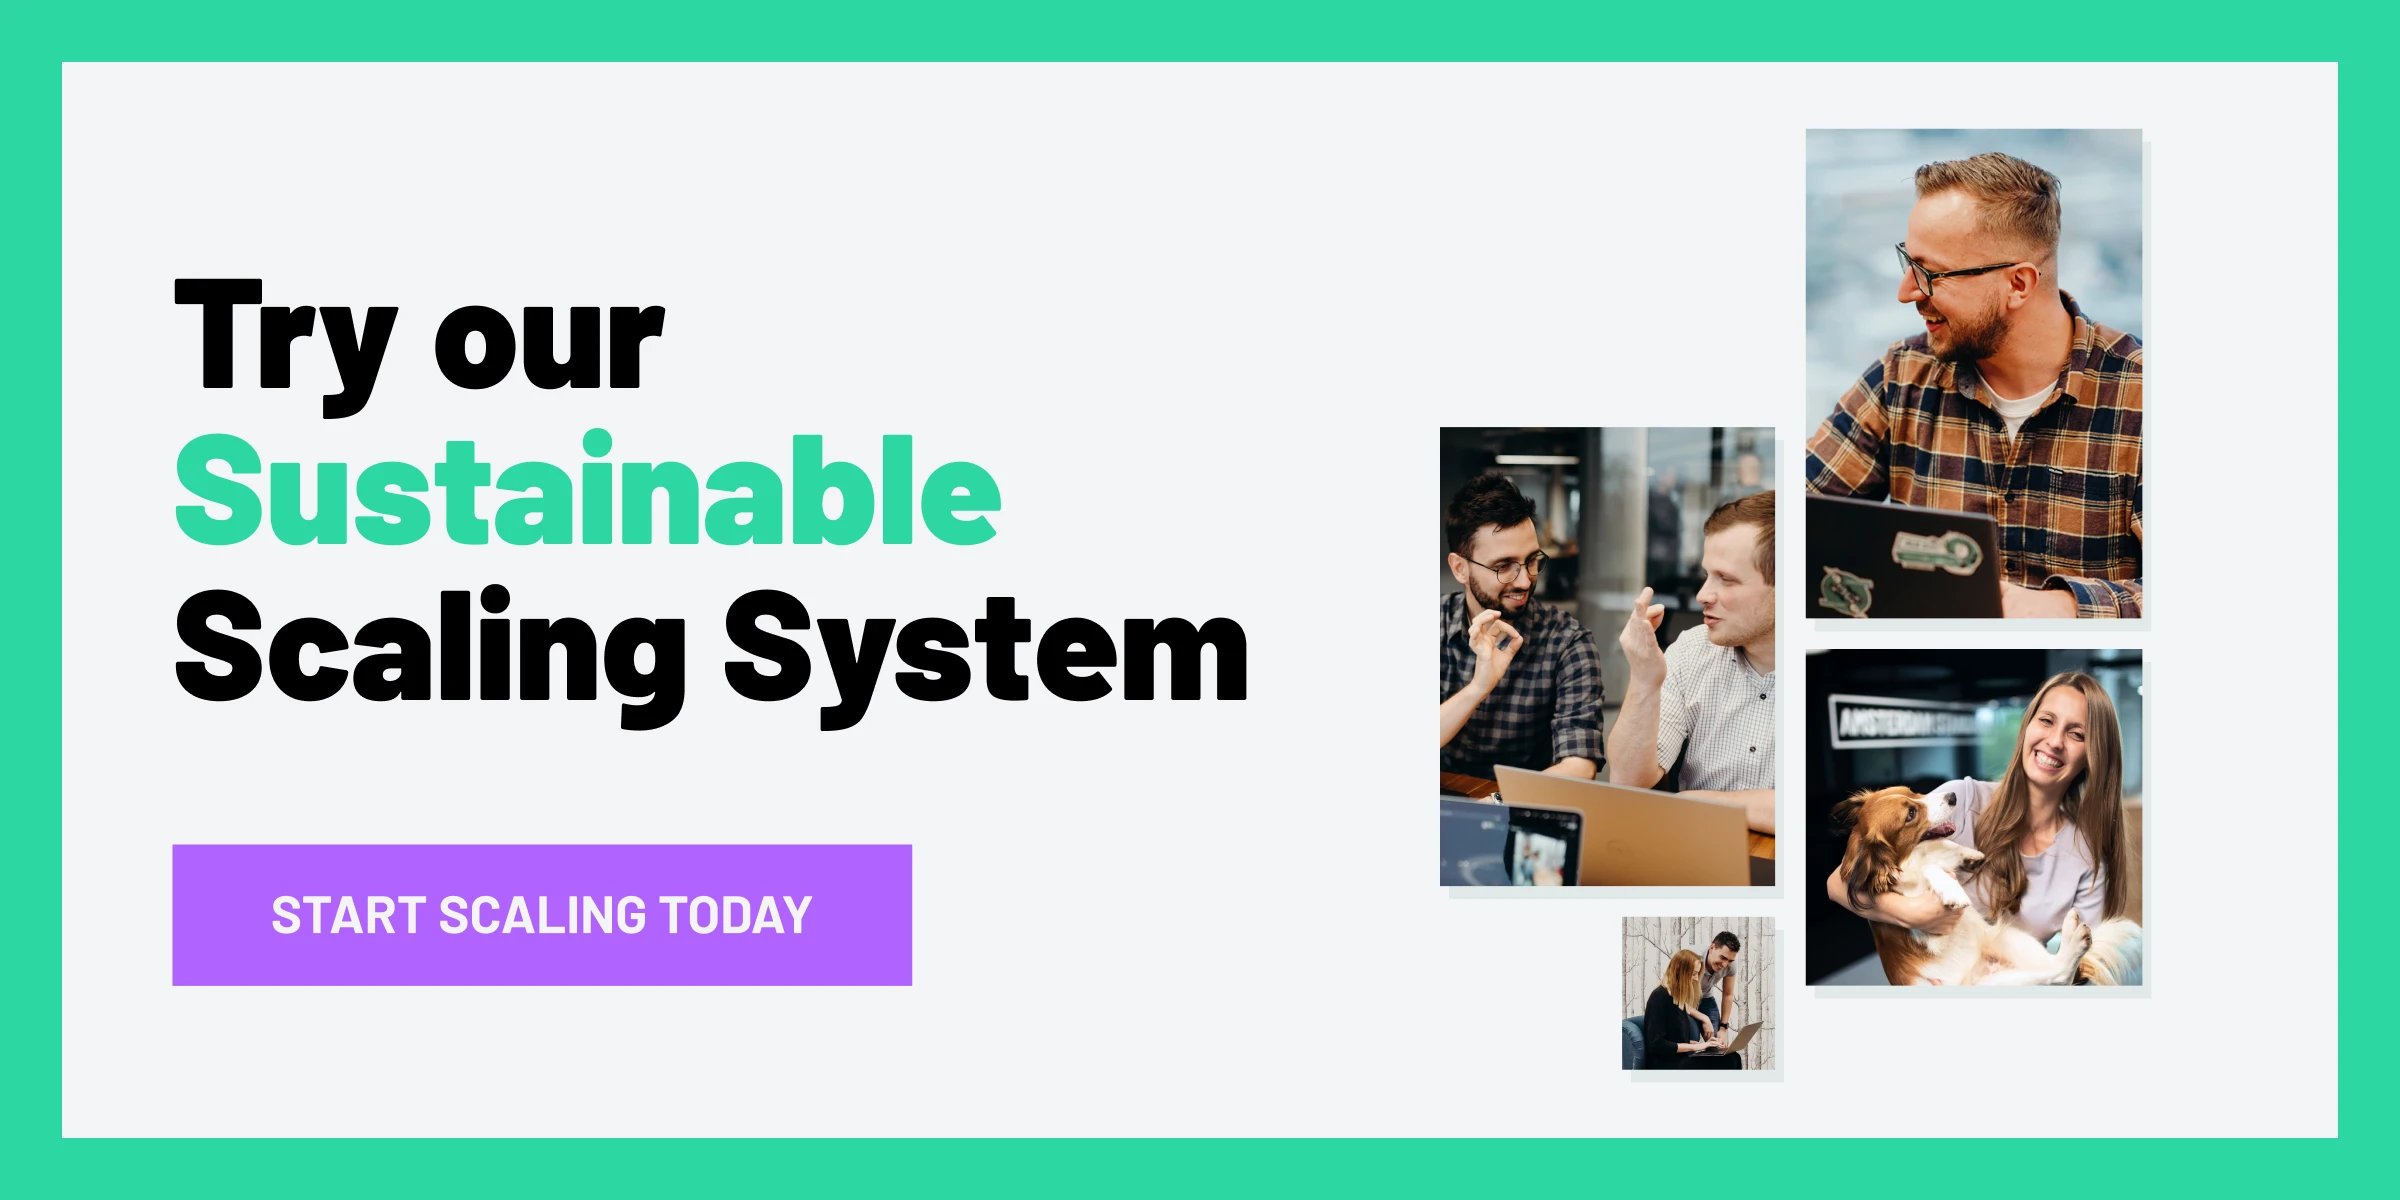 The Sustainable Scaling System